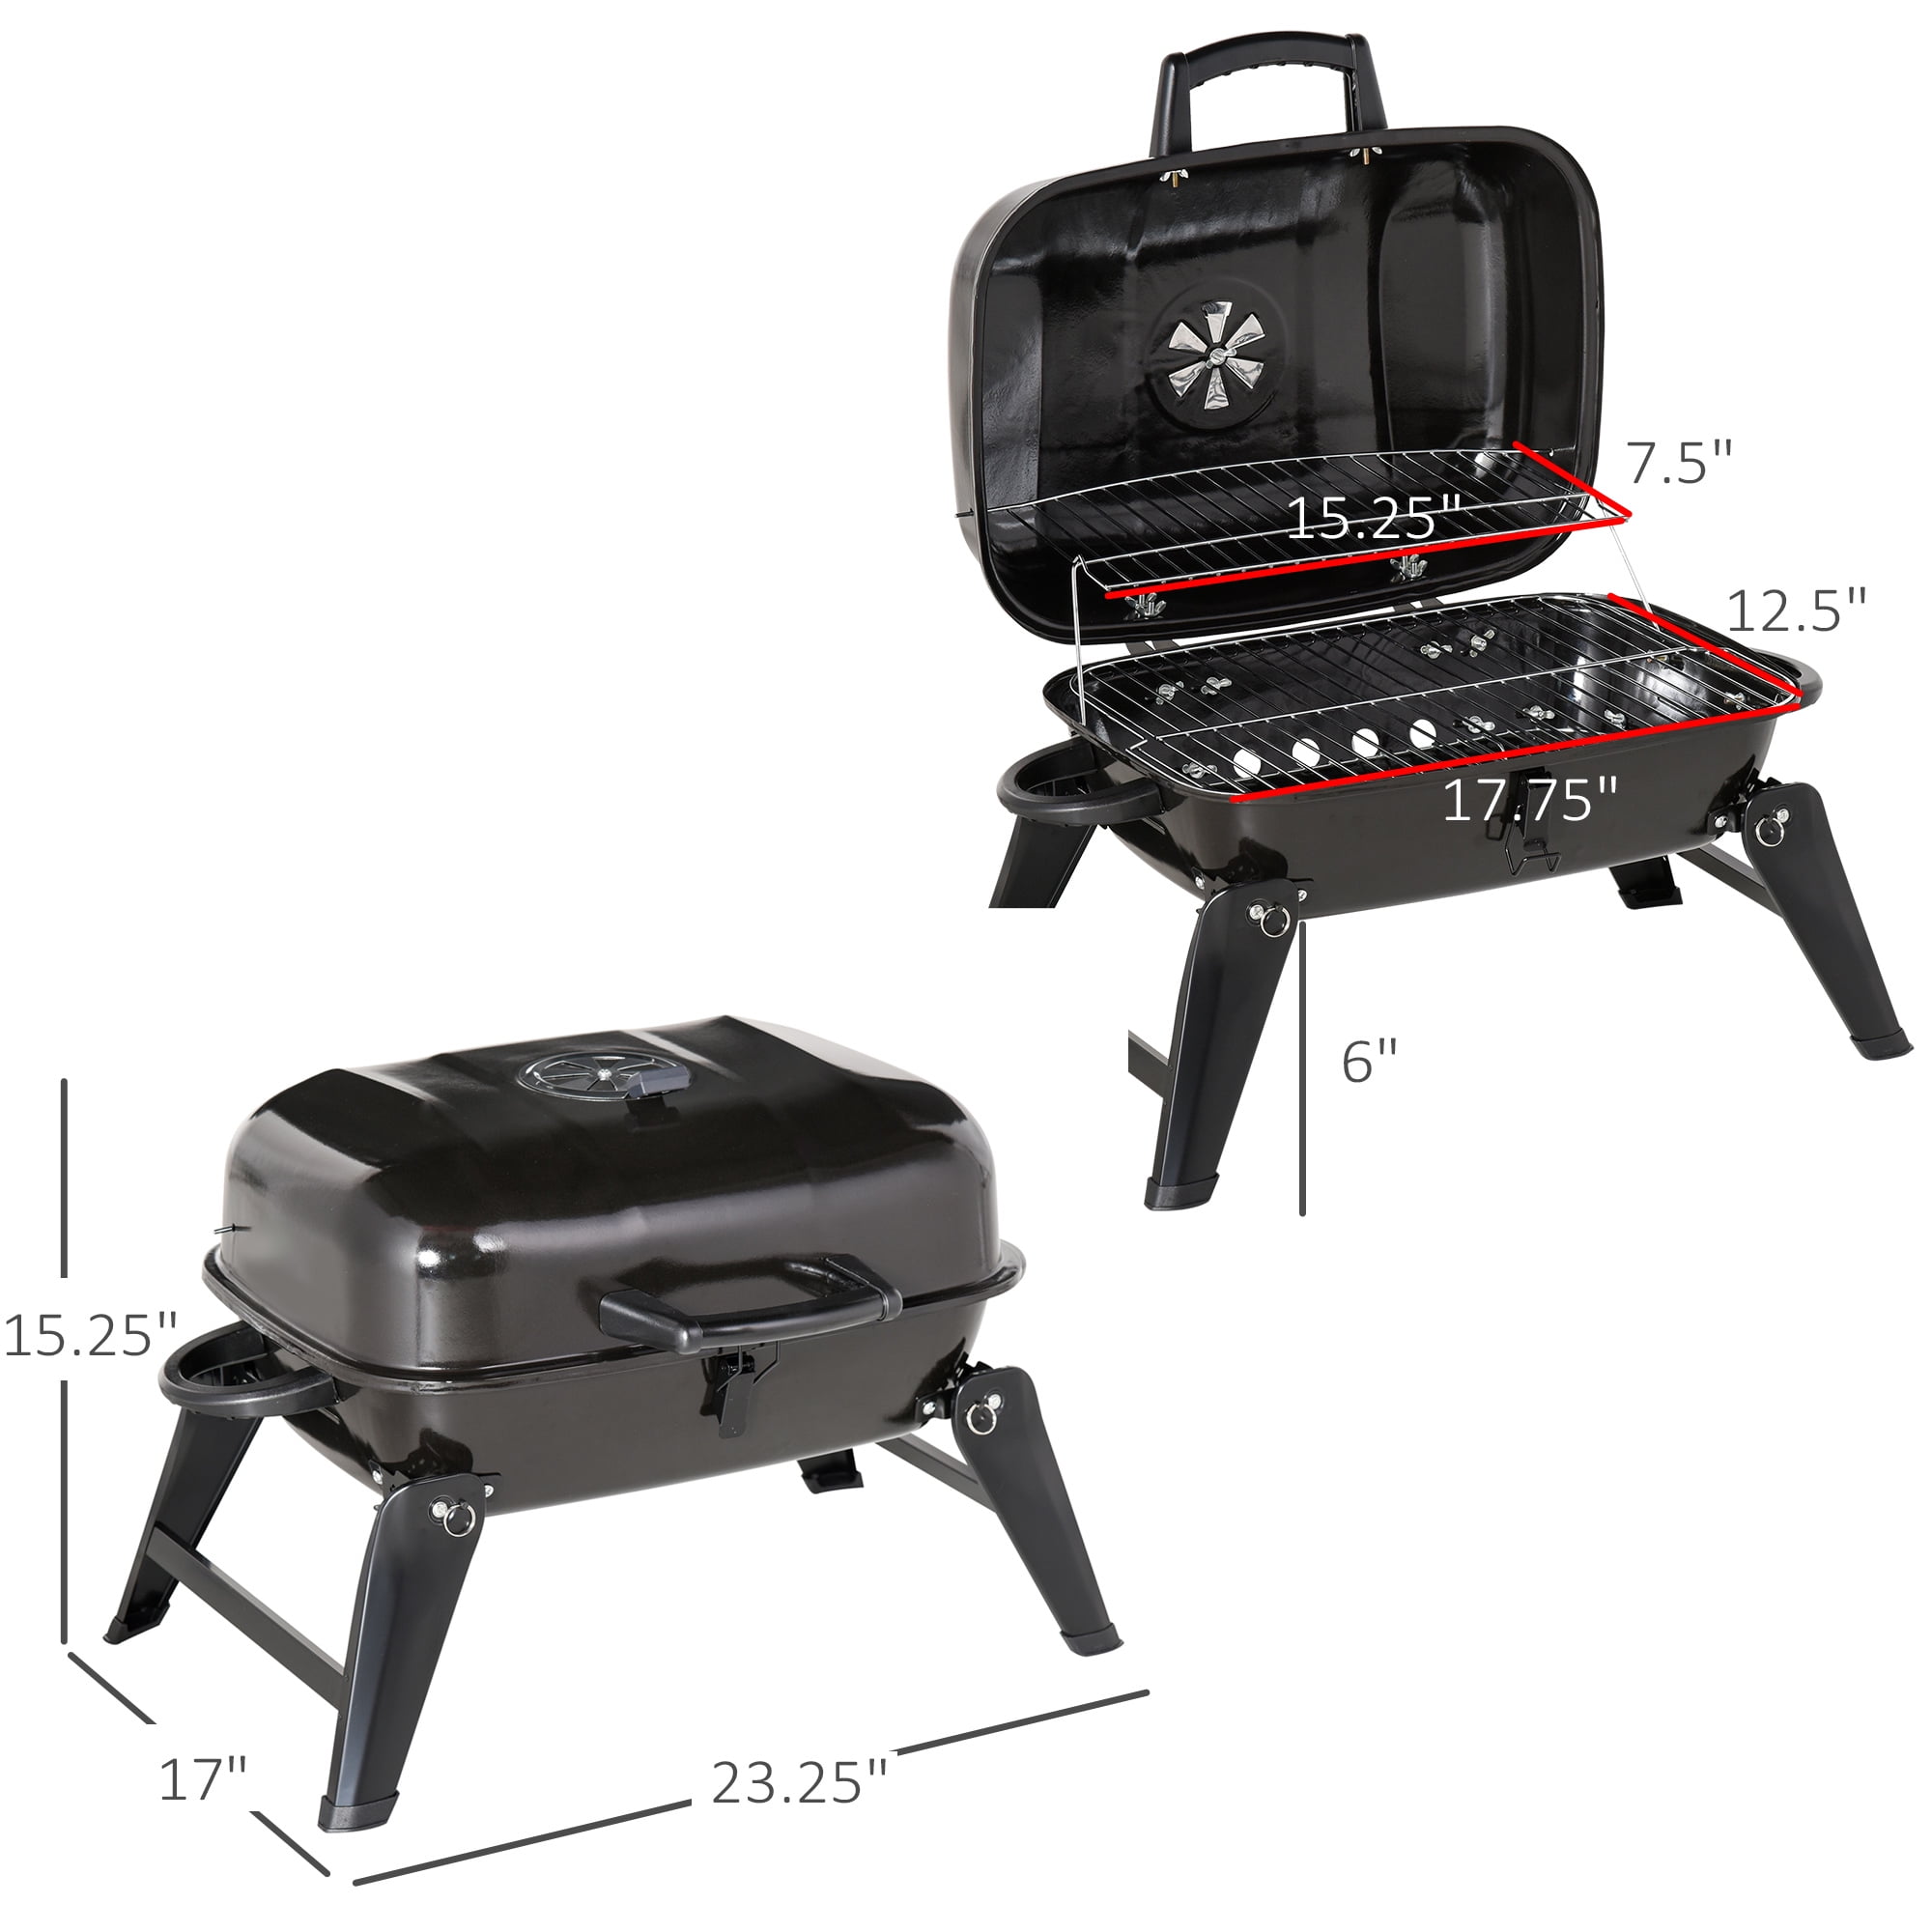 14 in. Iron Porcelain Portable Folding Outdoor Tabletop Charcoal Barbecue  Grill in Black with Compact Design